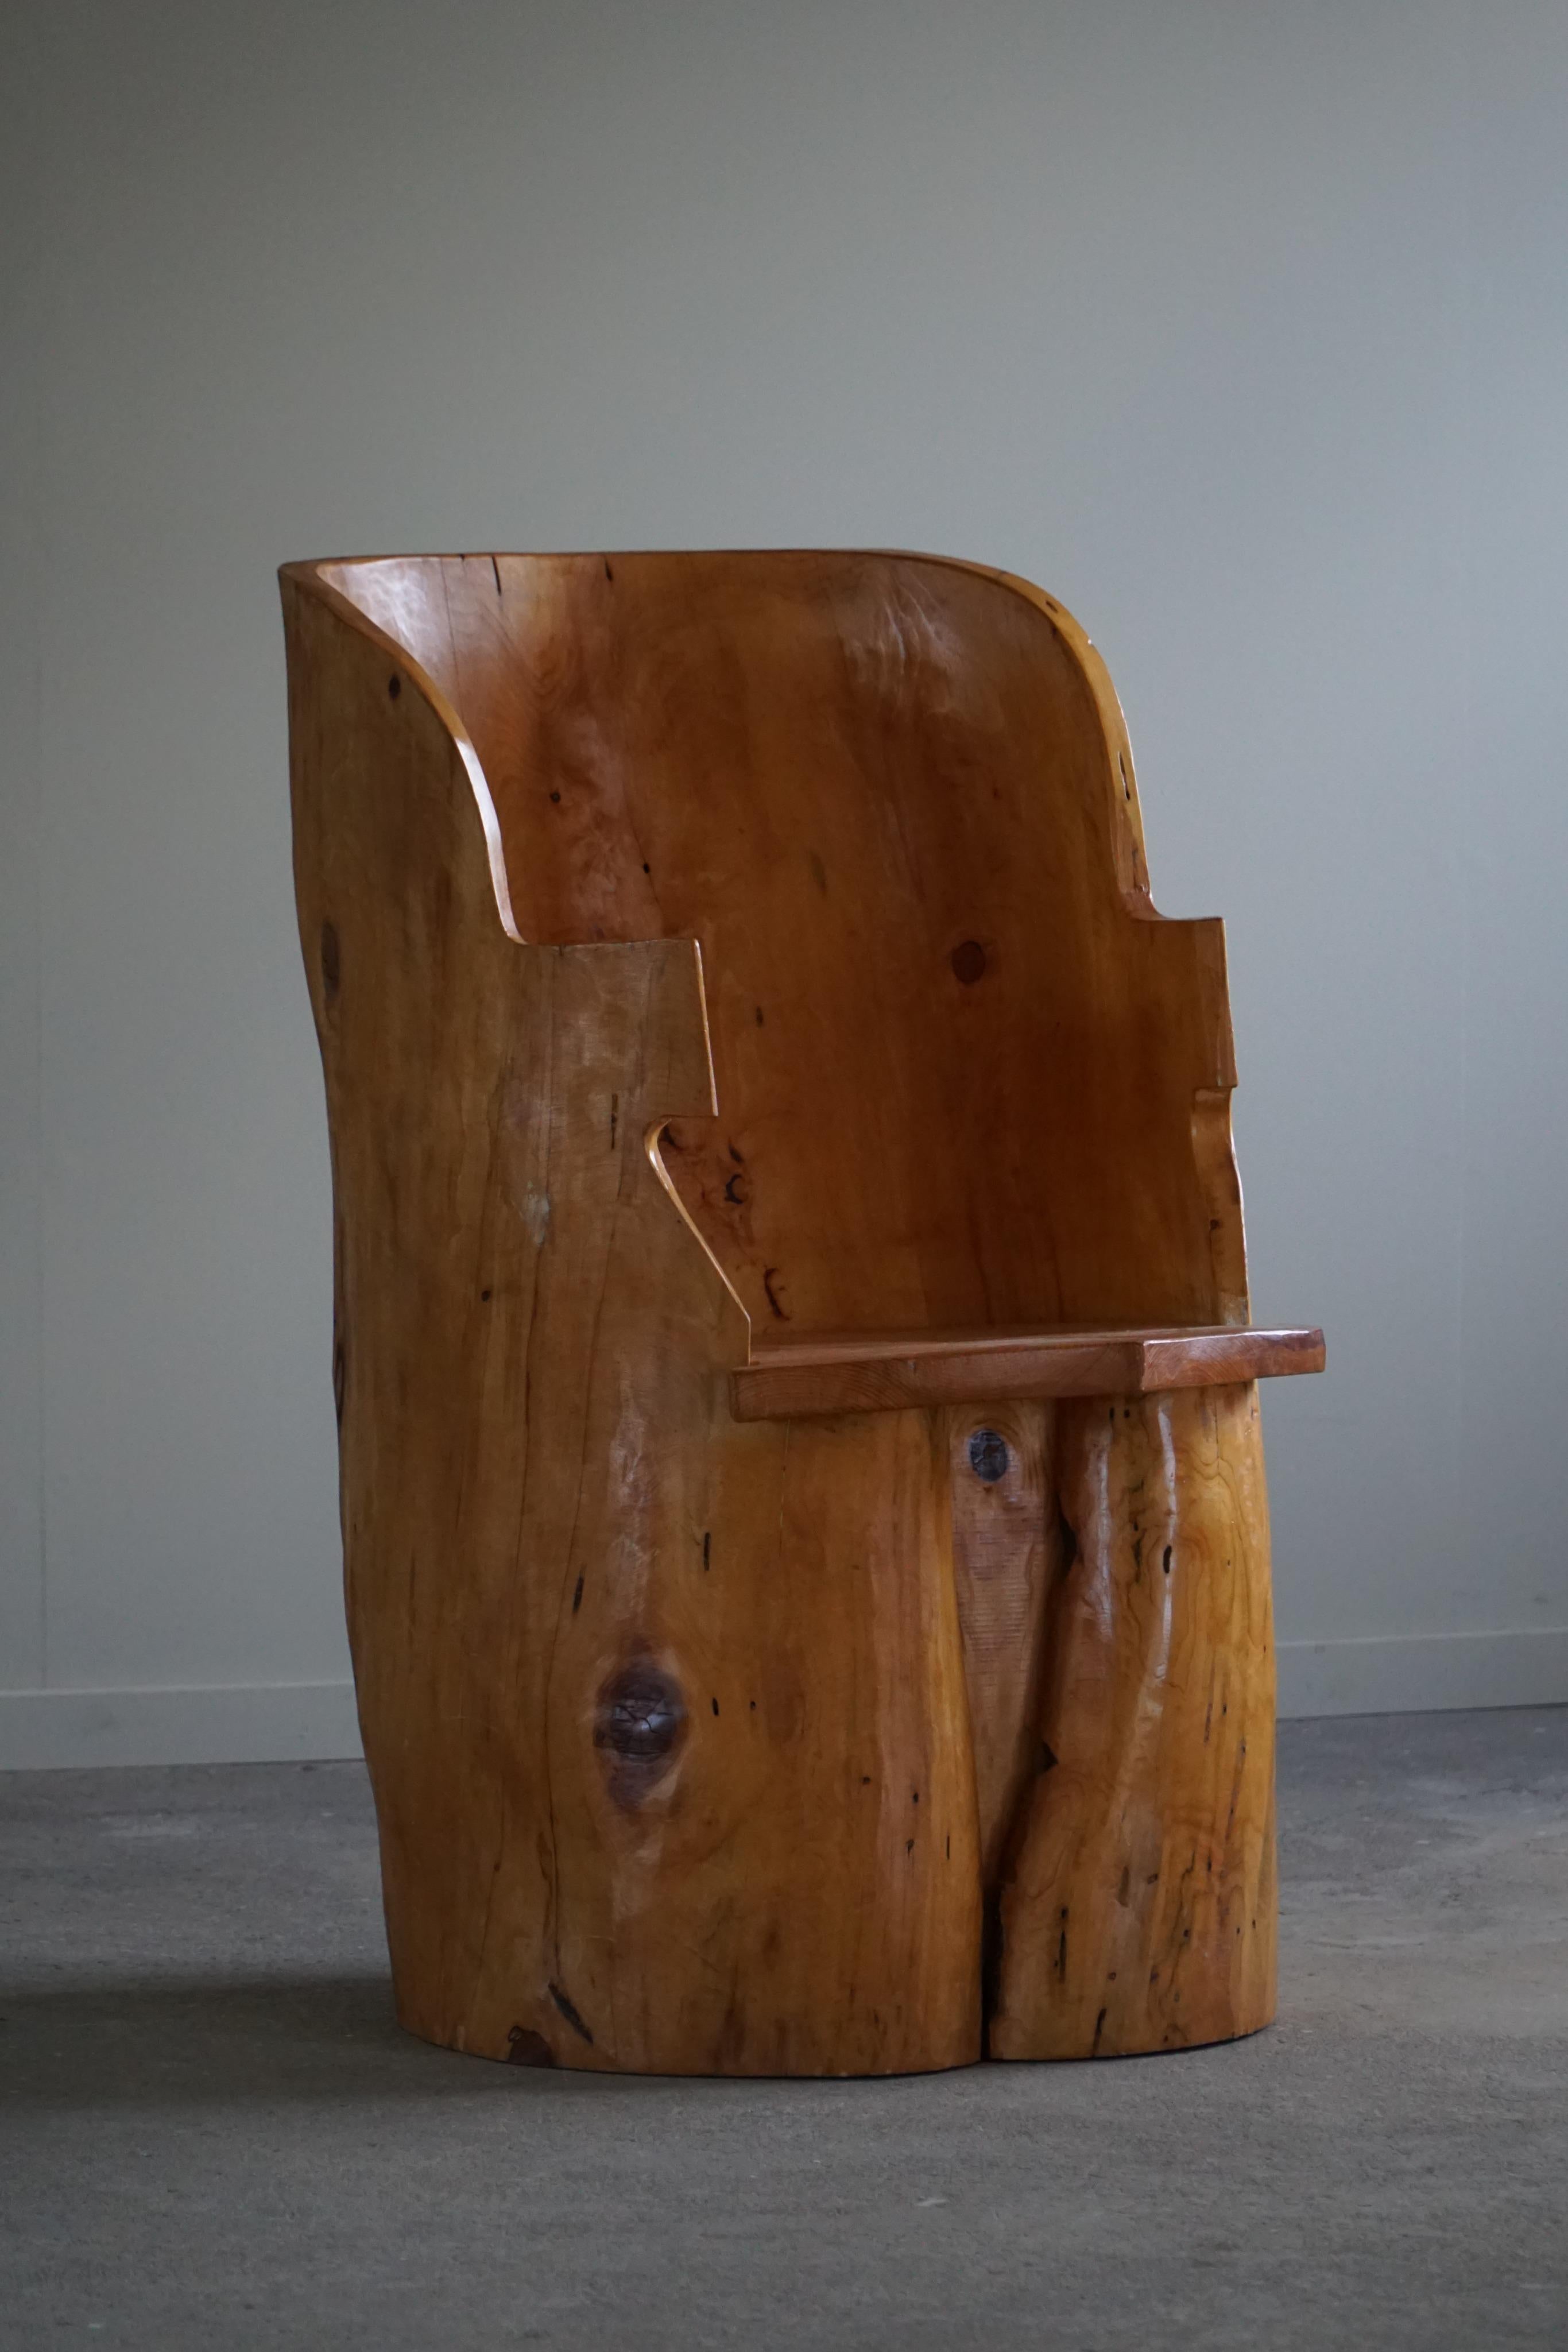 Stump Chair in Solid Birch by a Swedish Cabinetmaker, Wabi Sabi, 1950s For Sale 11